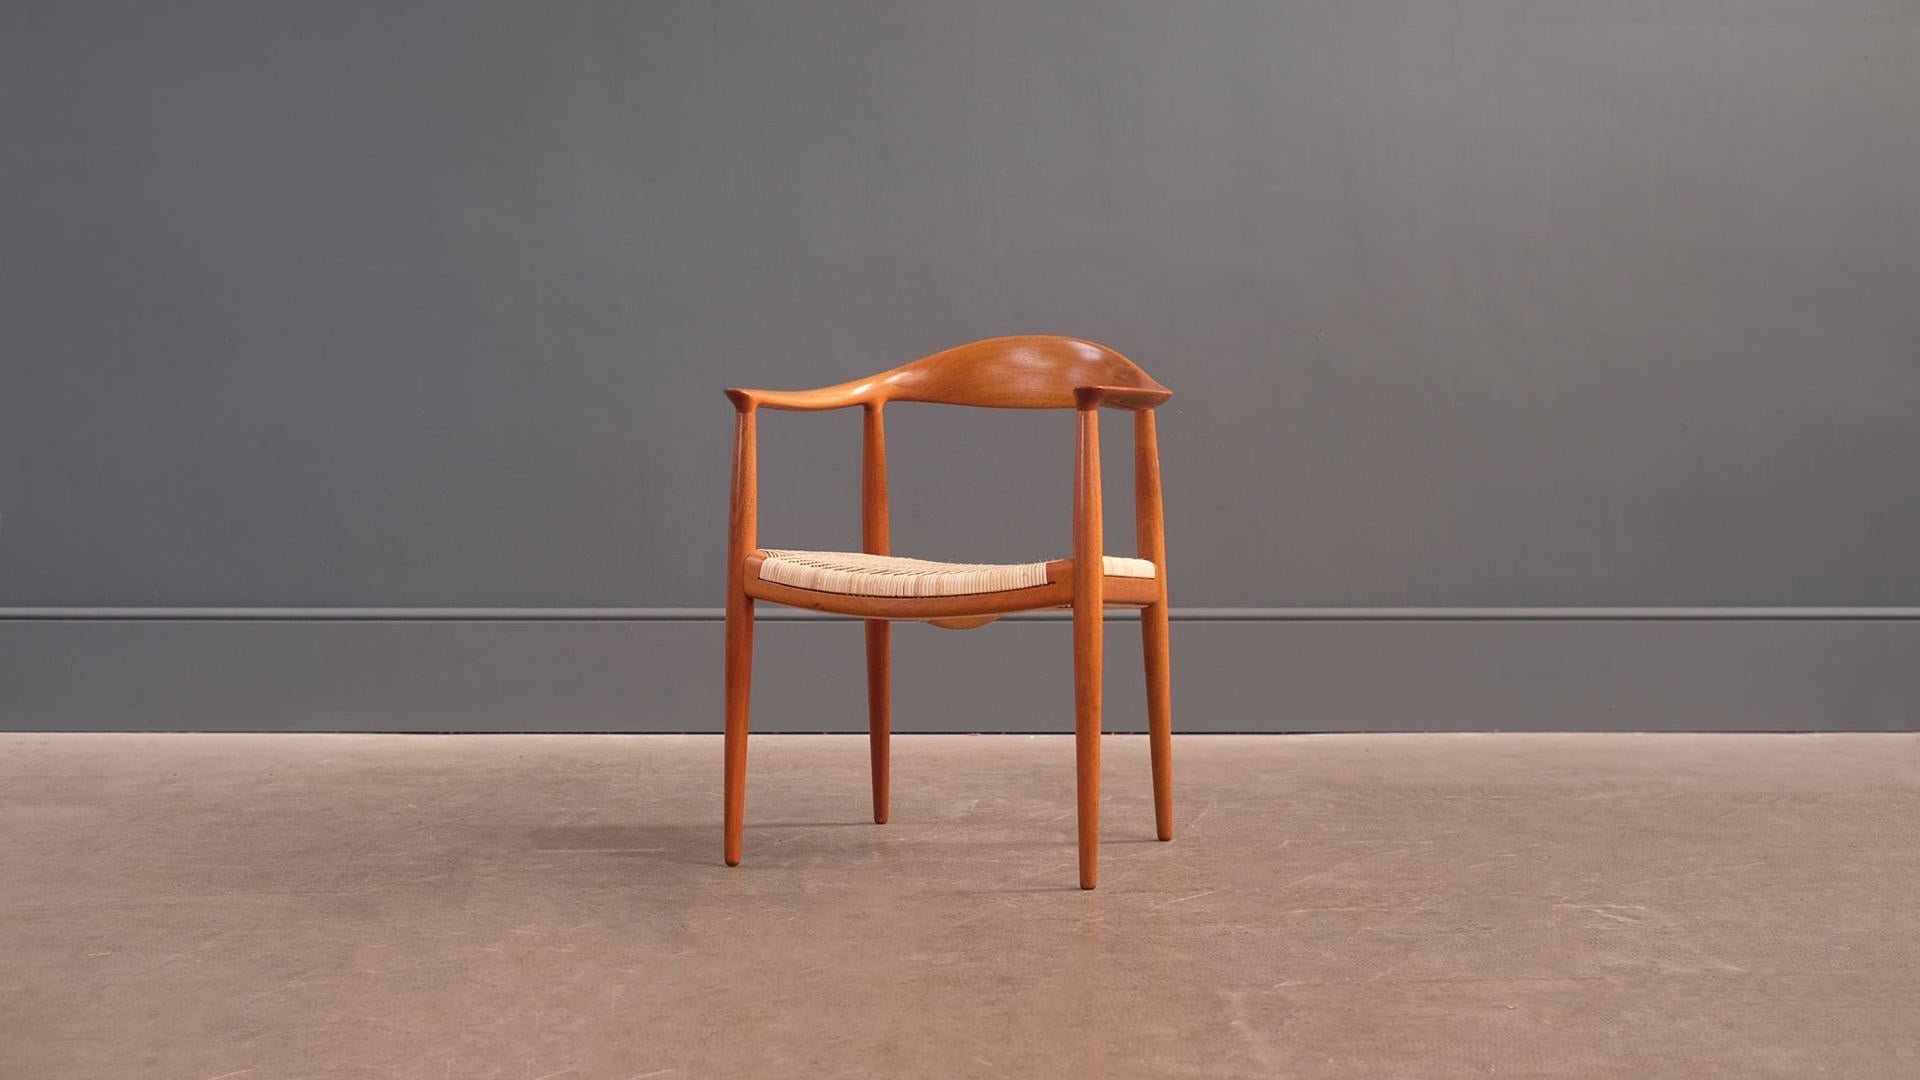 ‘The Chair’ model 501 designed by Hans Wegner for master cabinet maker Johannes Hansen, Copenhagen. Wonderful example of this legendary design in exceptional condition. Beautiful piece.